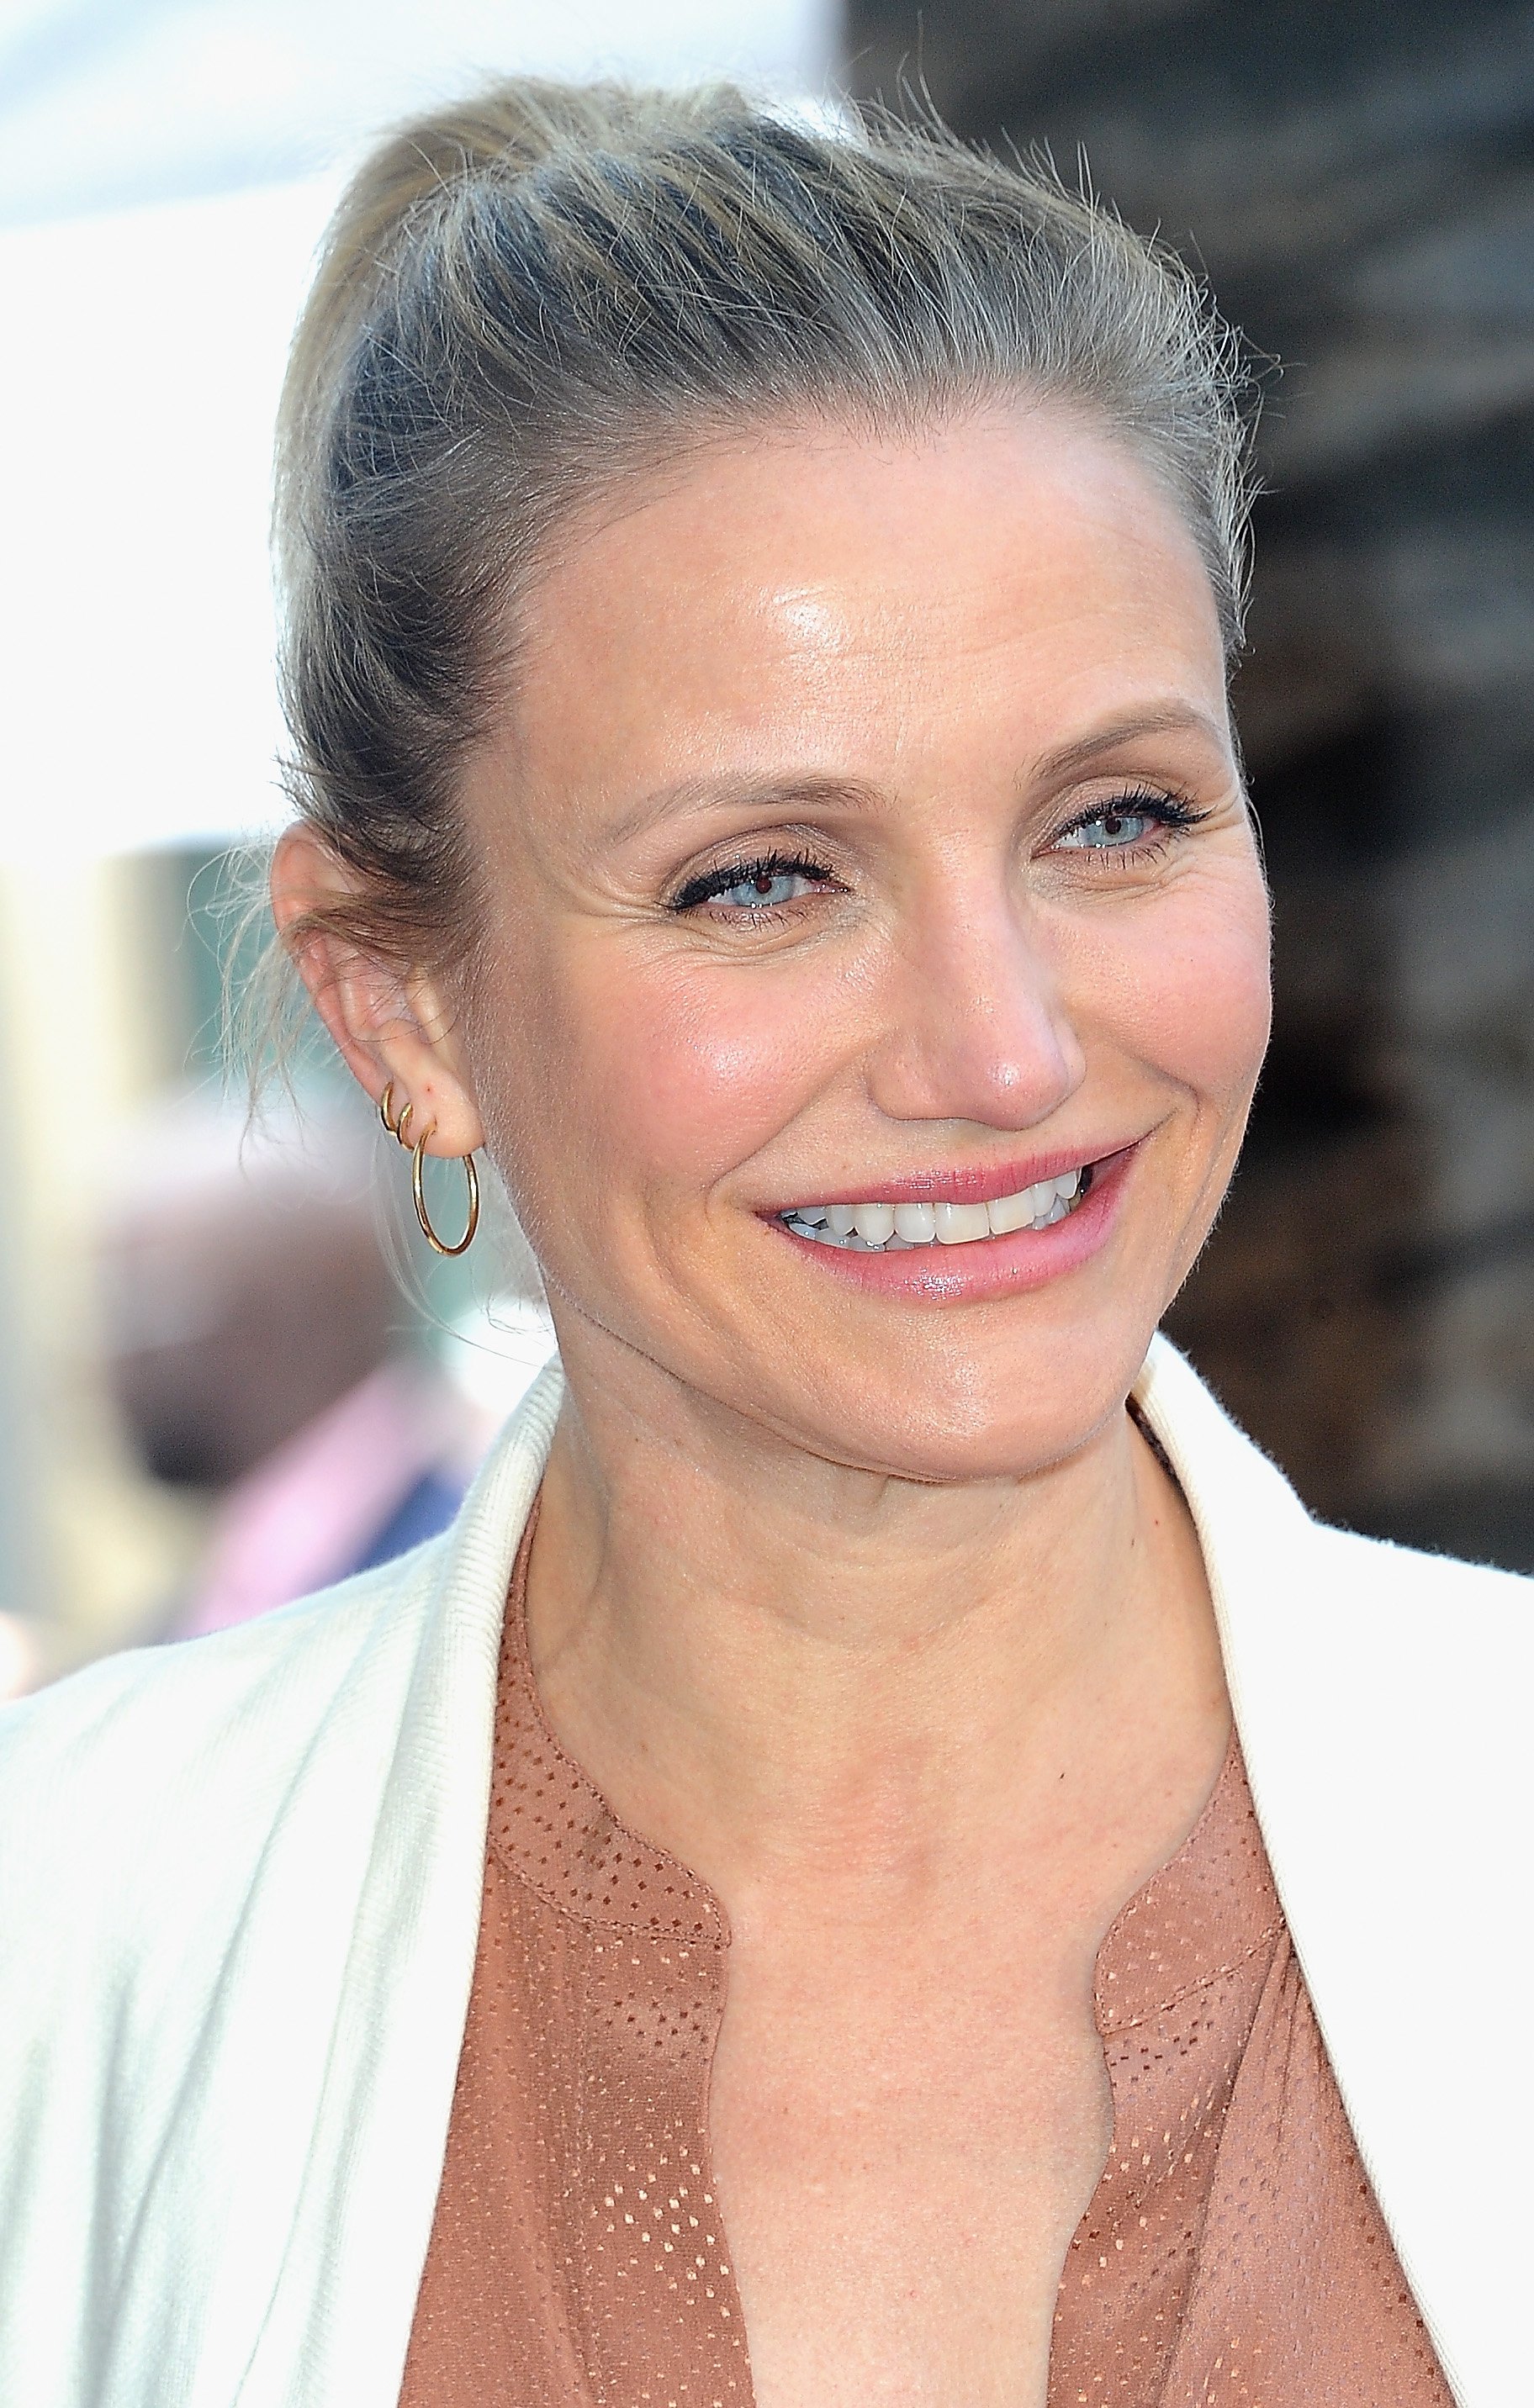 Cameron Diaz photographed at Lucy Liu's Star Ceremony On The Hollywood Walk of Fame on May 1, 2019 in Hollywood, California. | Source: Getty Images